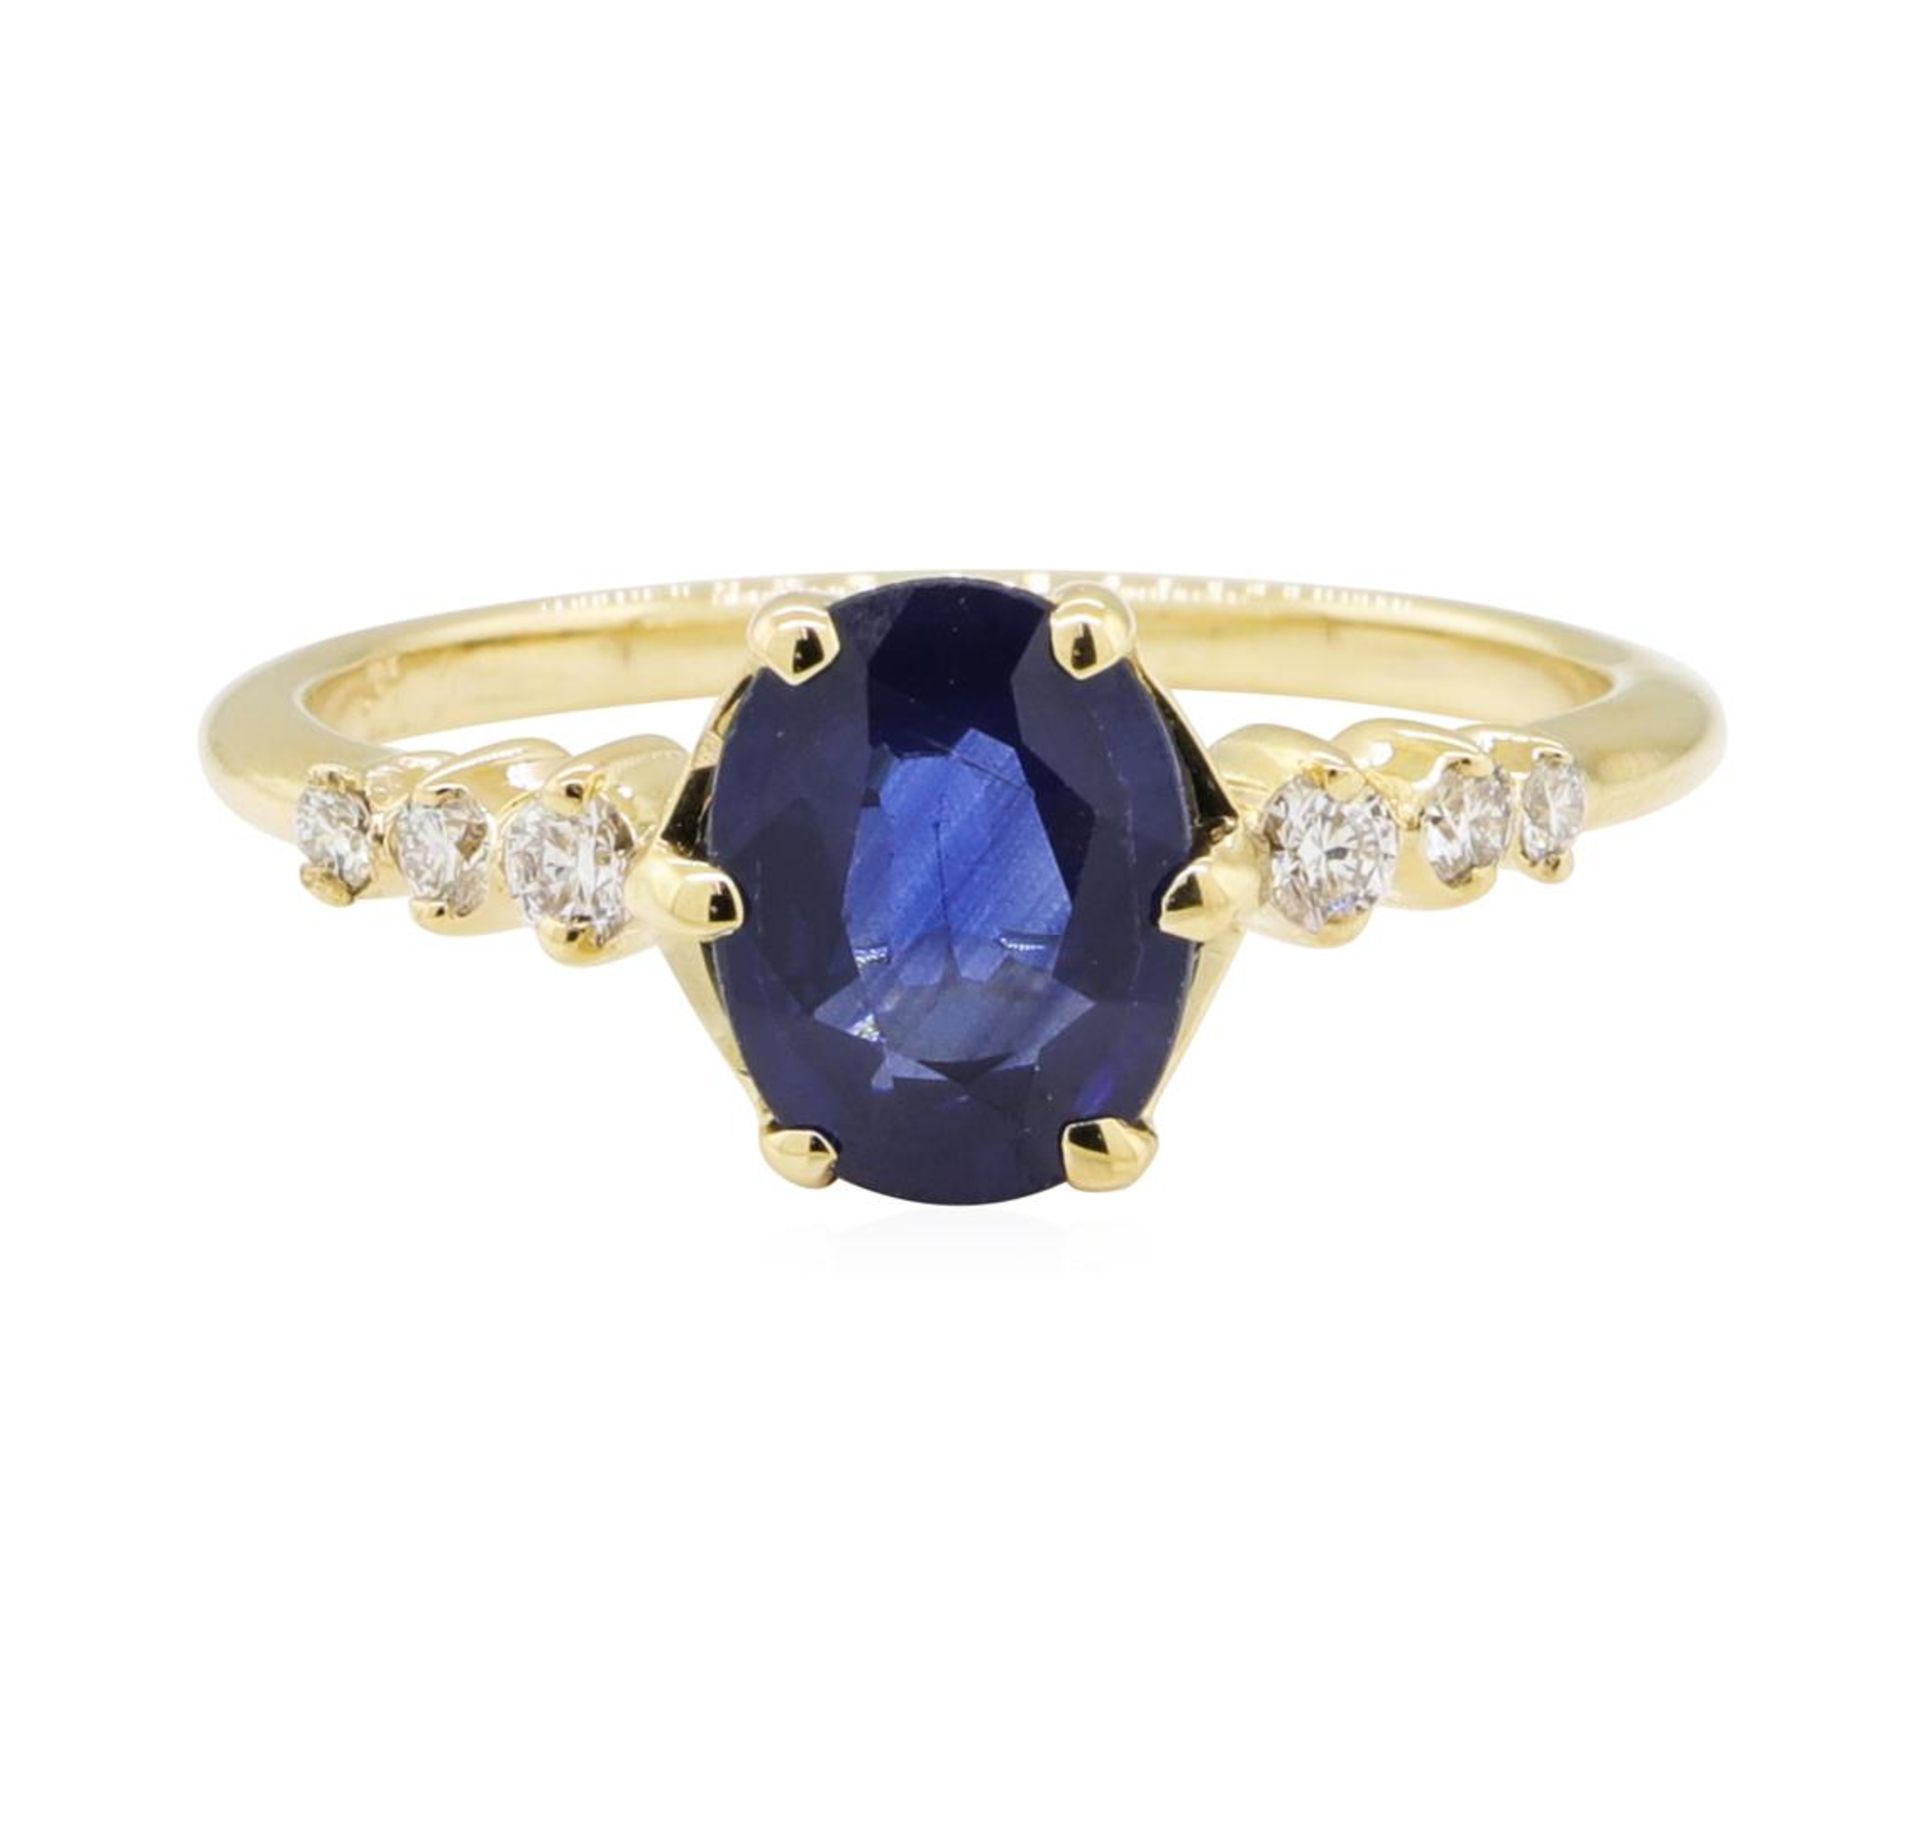 1.43ctw Sapphire and Diamond Ring - 14KT Yellow Gold - Image 2 of 4